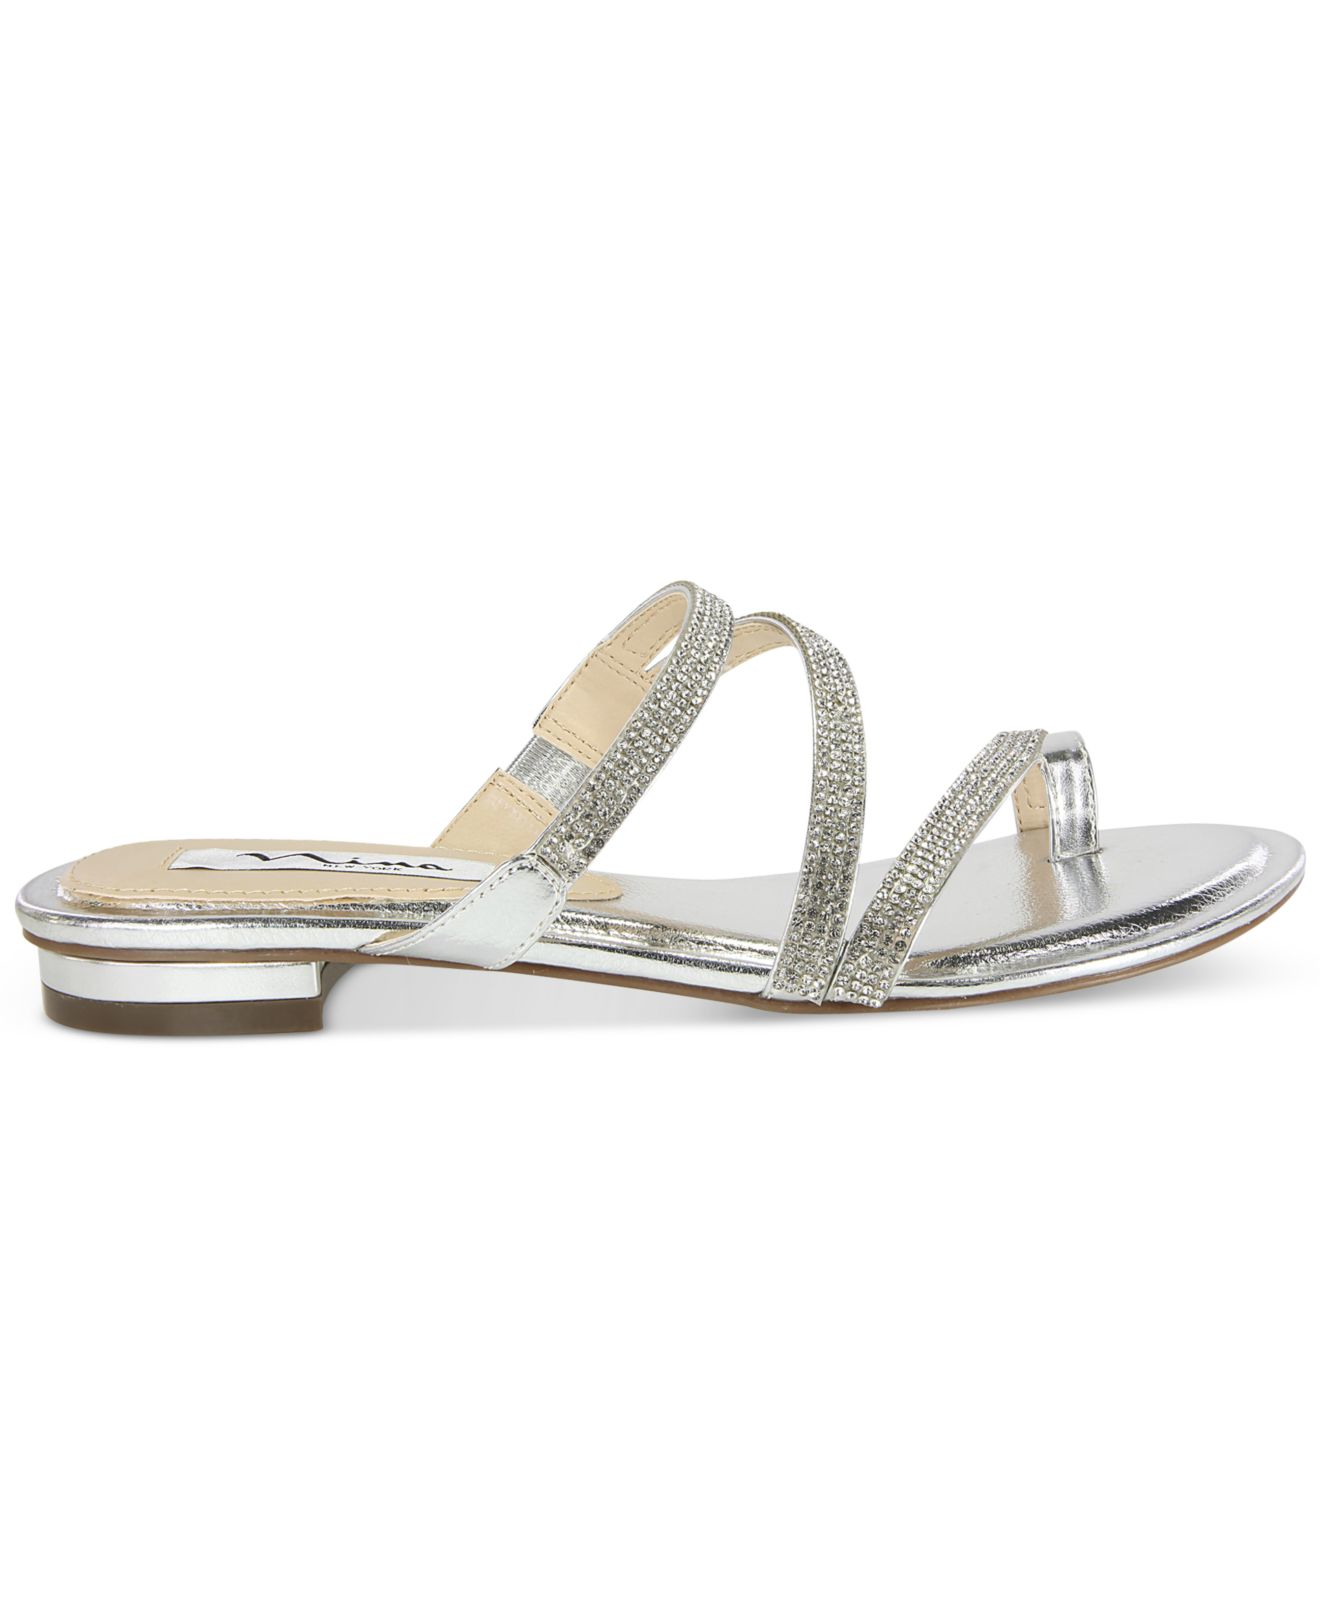 Nina Leather Kaileen Flat Evening Sandals in Silver (Metallic) - Lyst